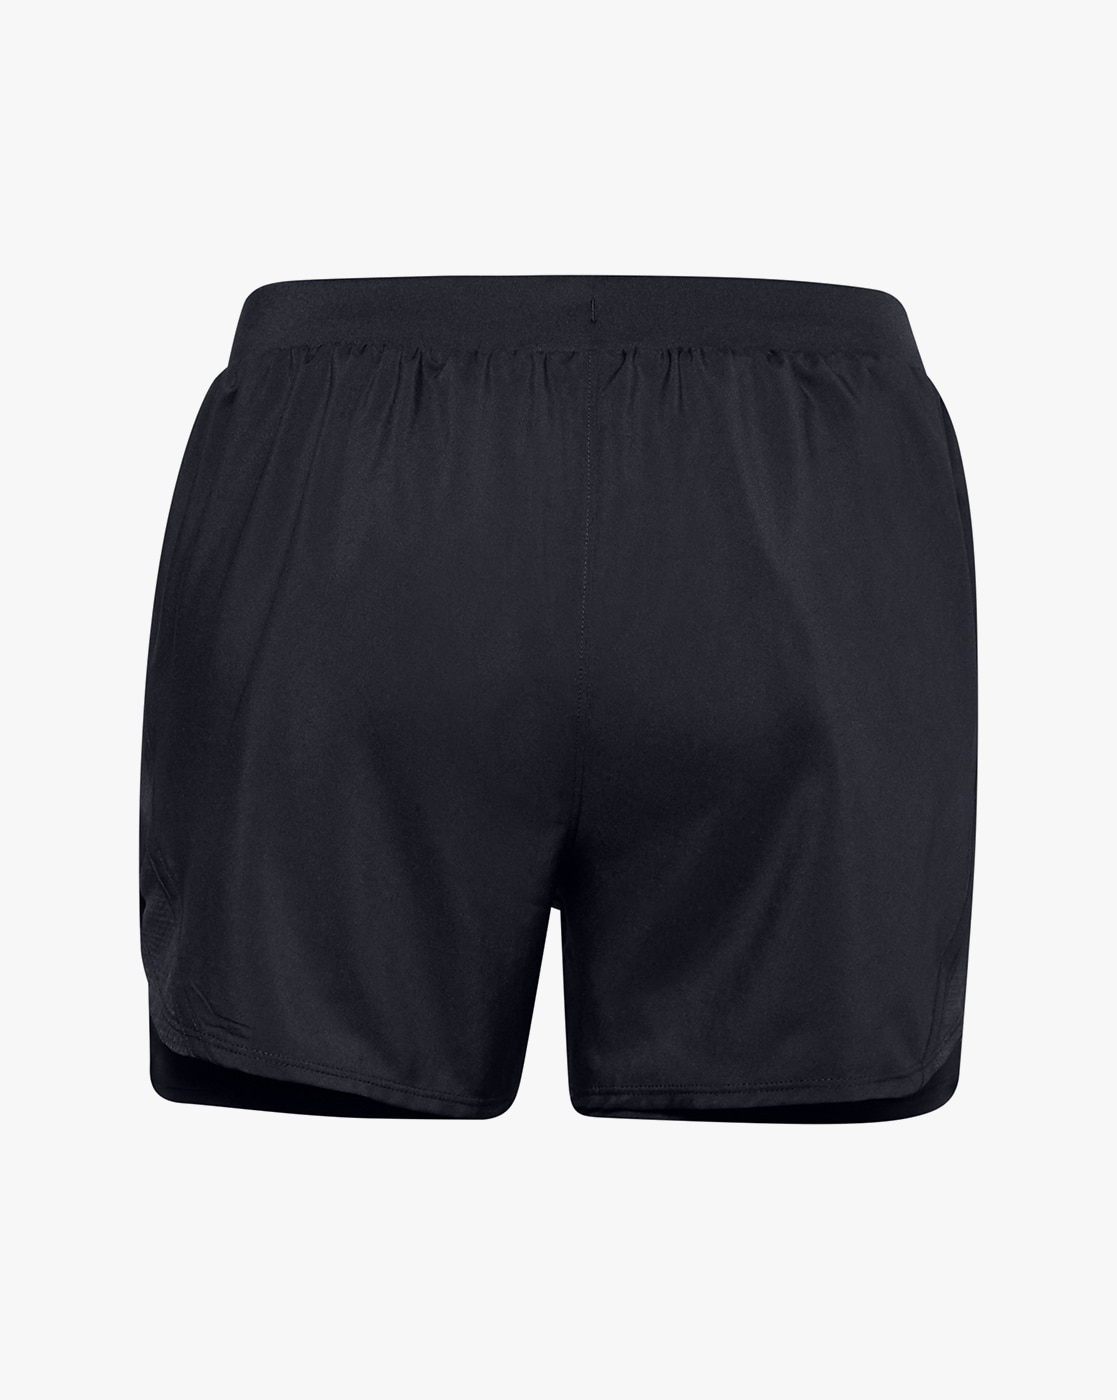 Under Armour Shorts W 1360925001